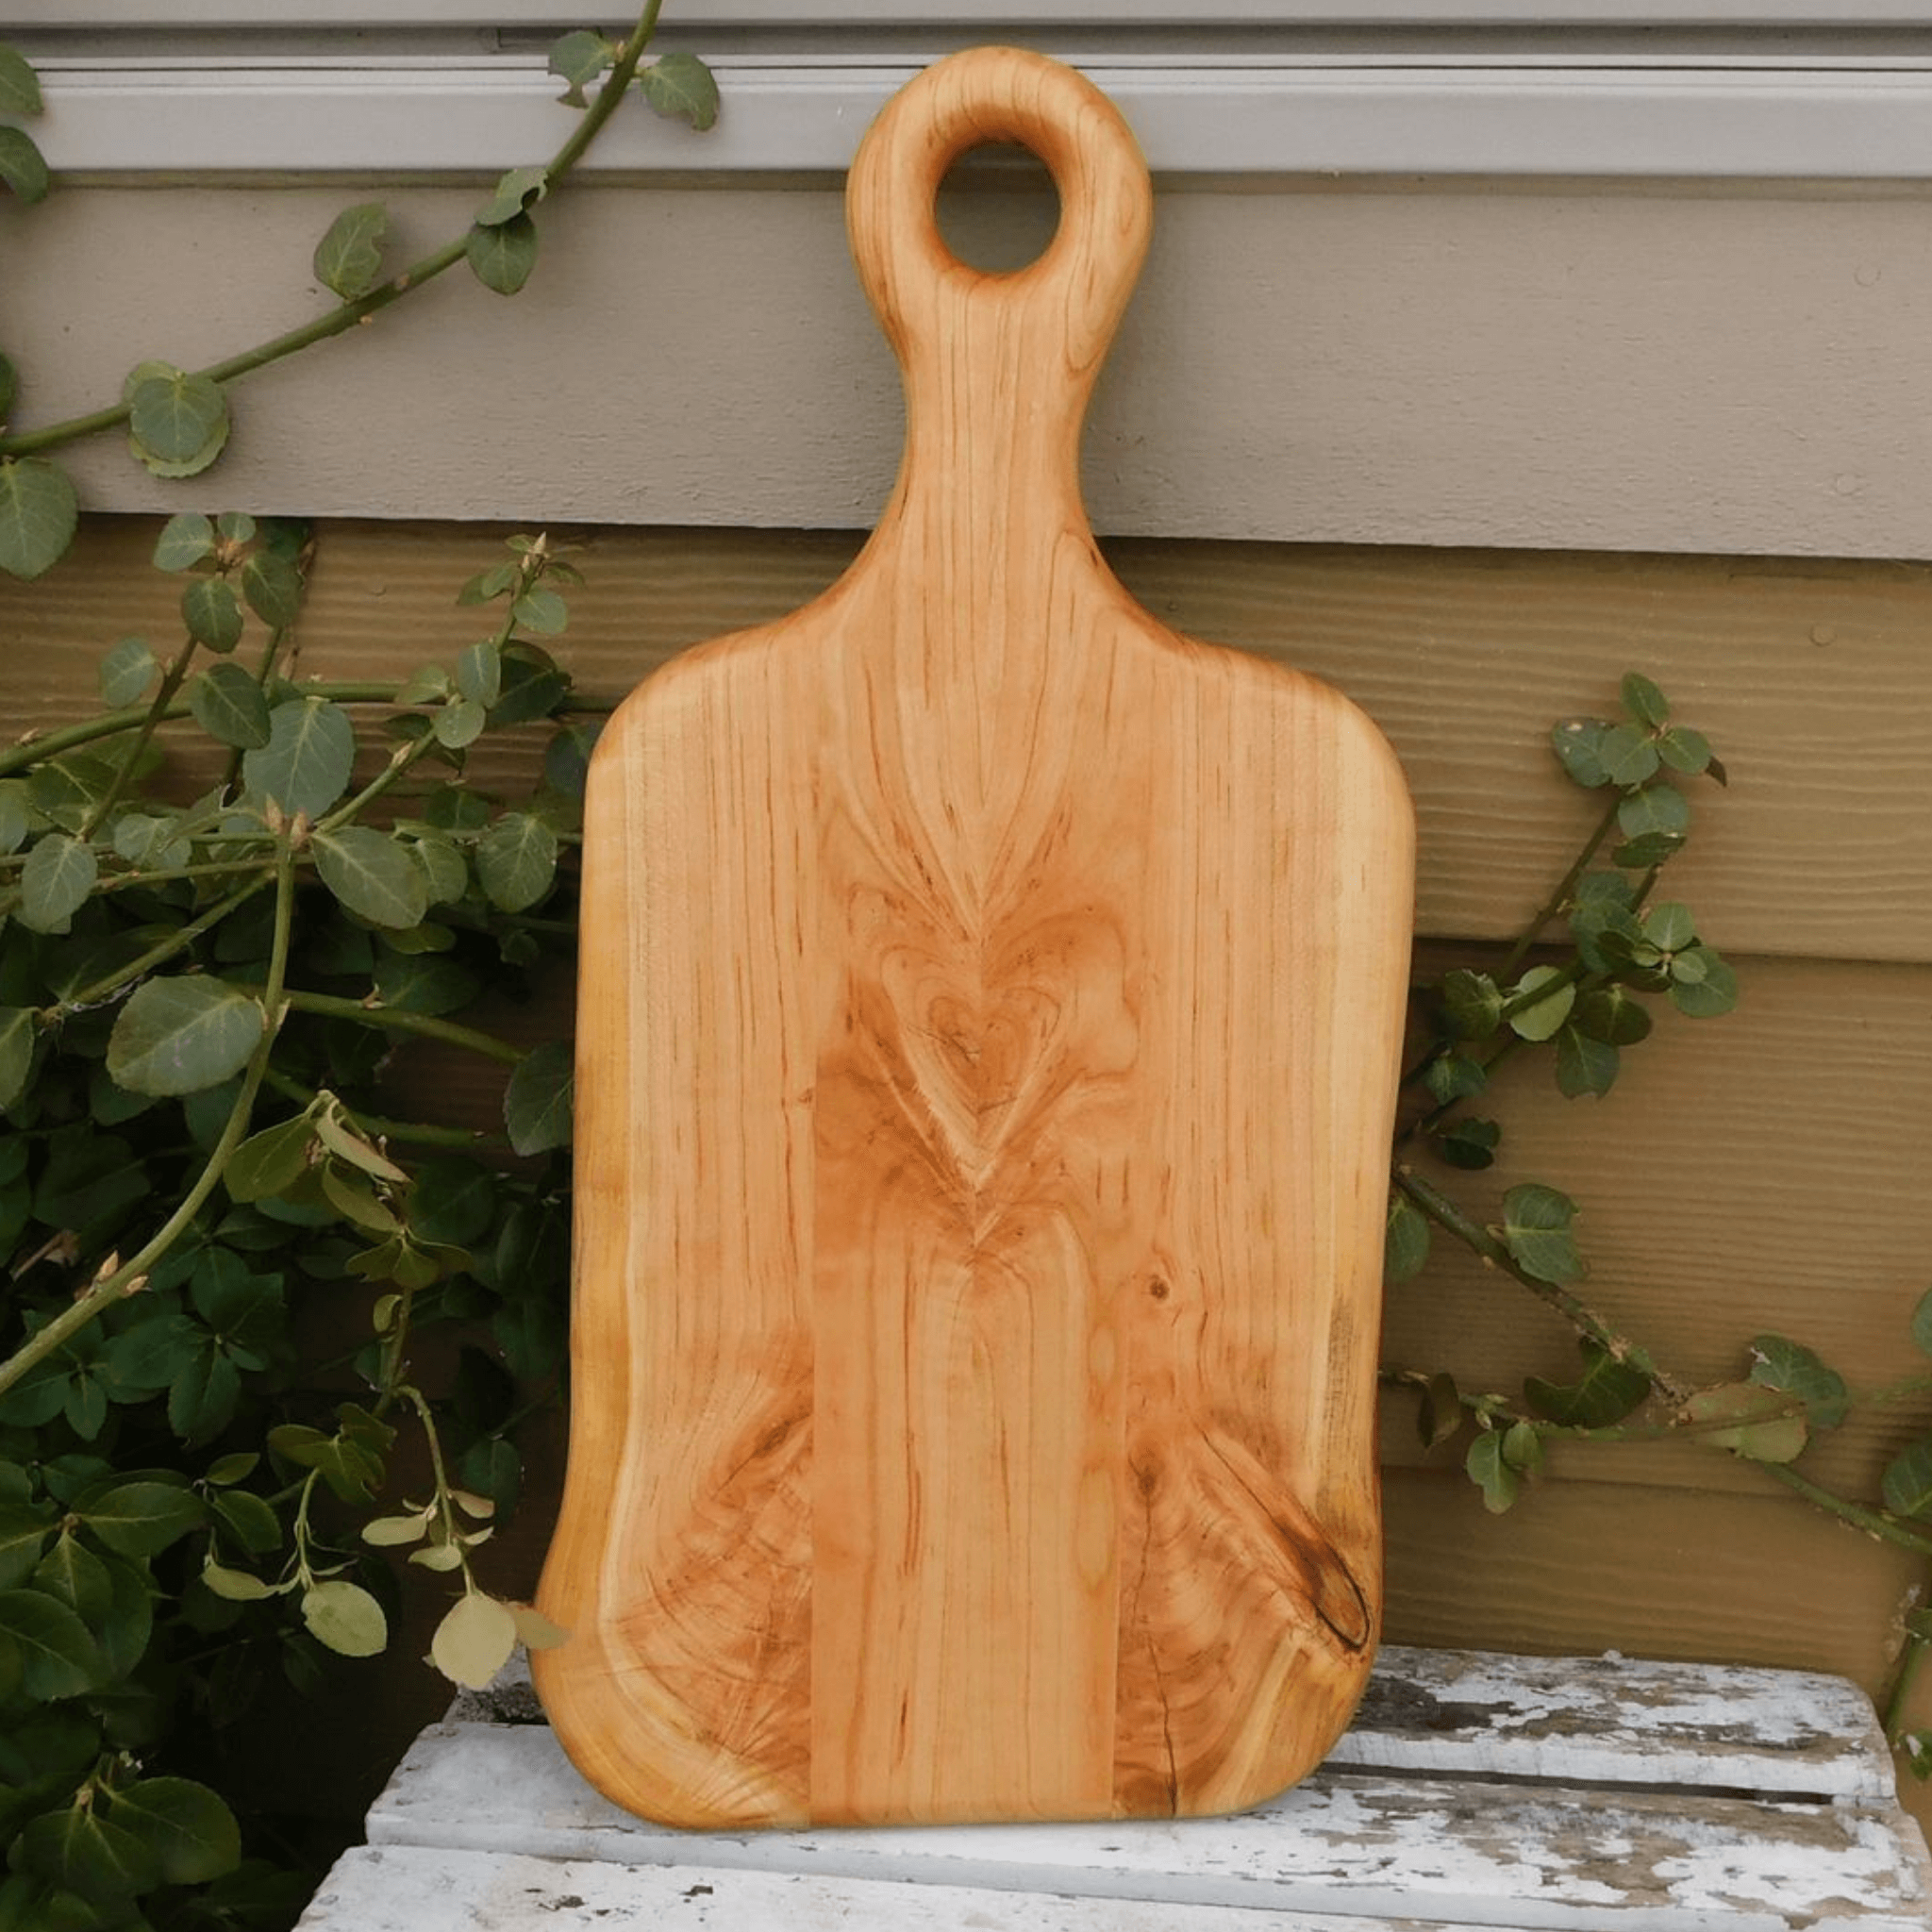 Handcrafted cherry wood charcuterie board paddle with handle. Handmade in the USA.